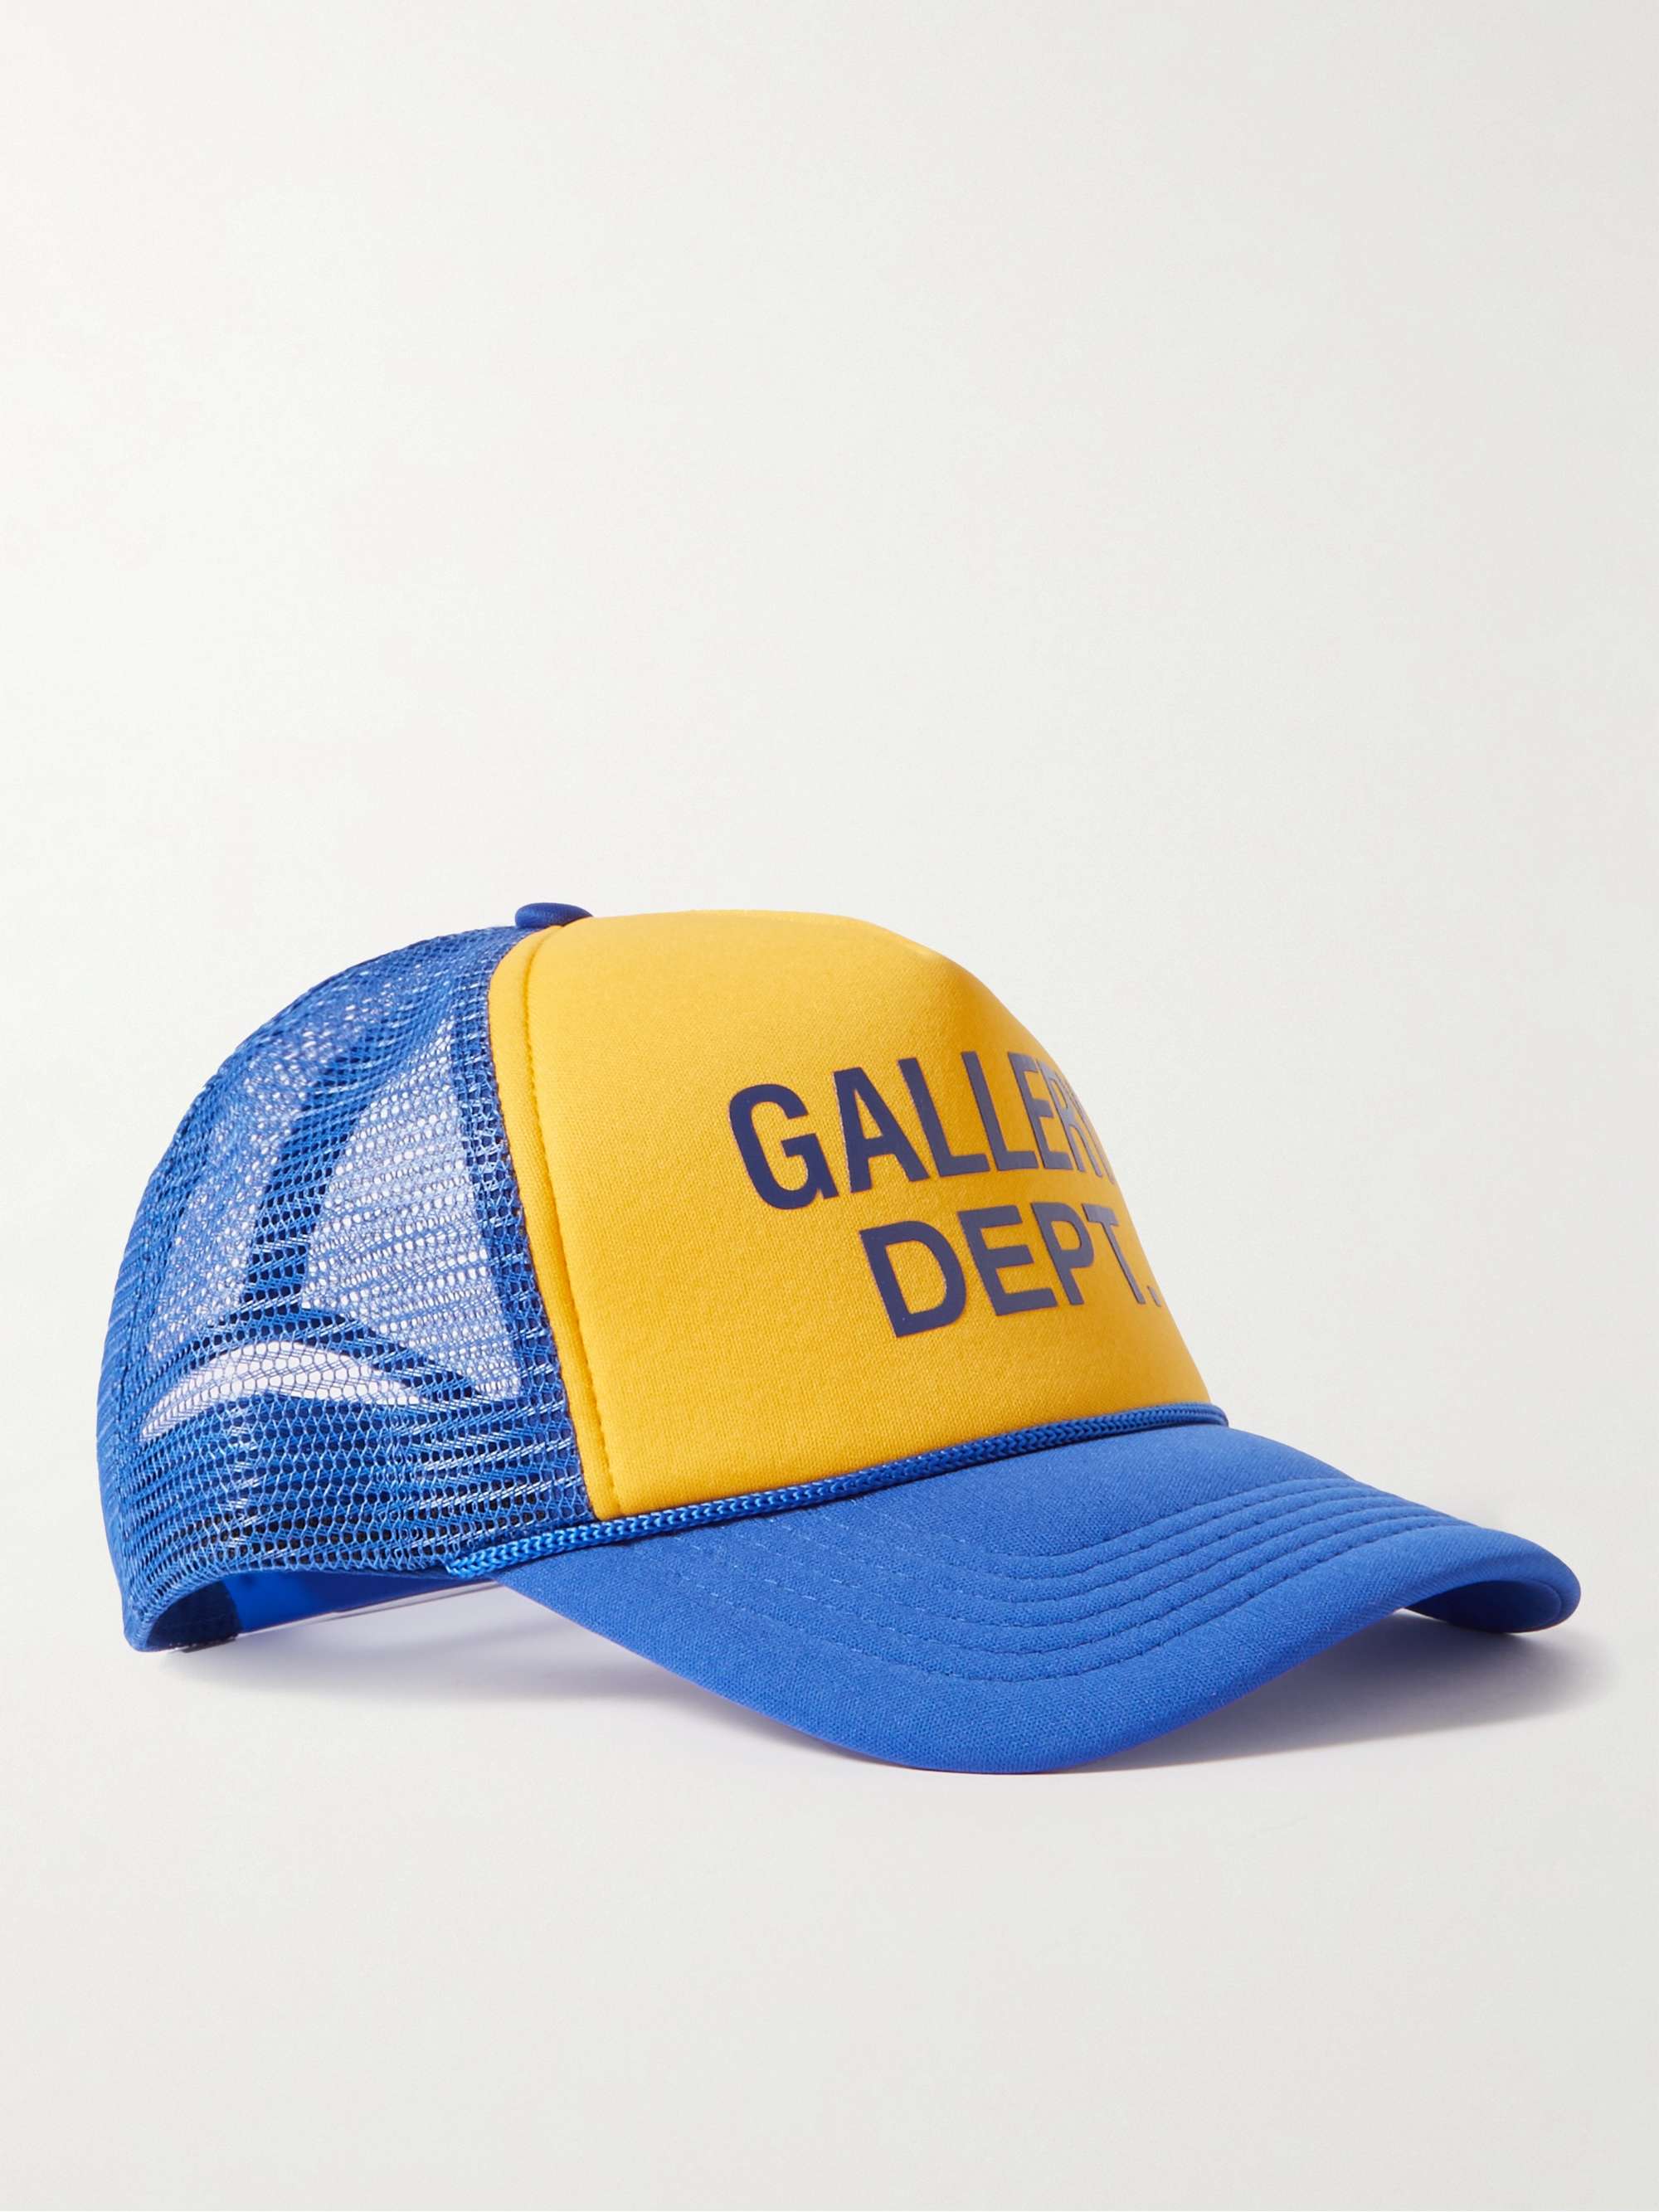 GALLERY DEPT. Printed Two-Tone Twill and Mesh Trucker Cap for Men